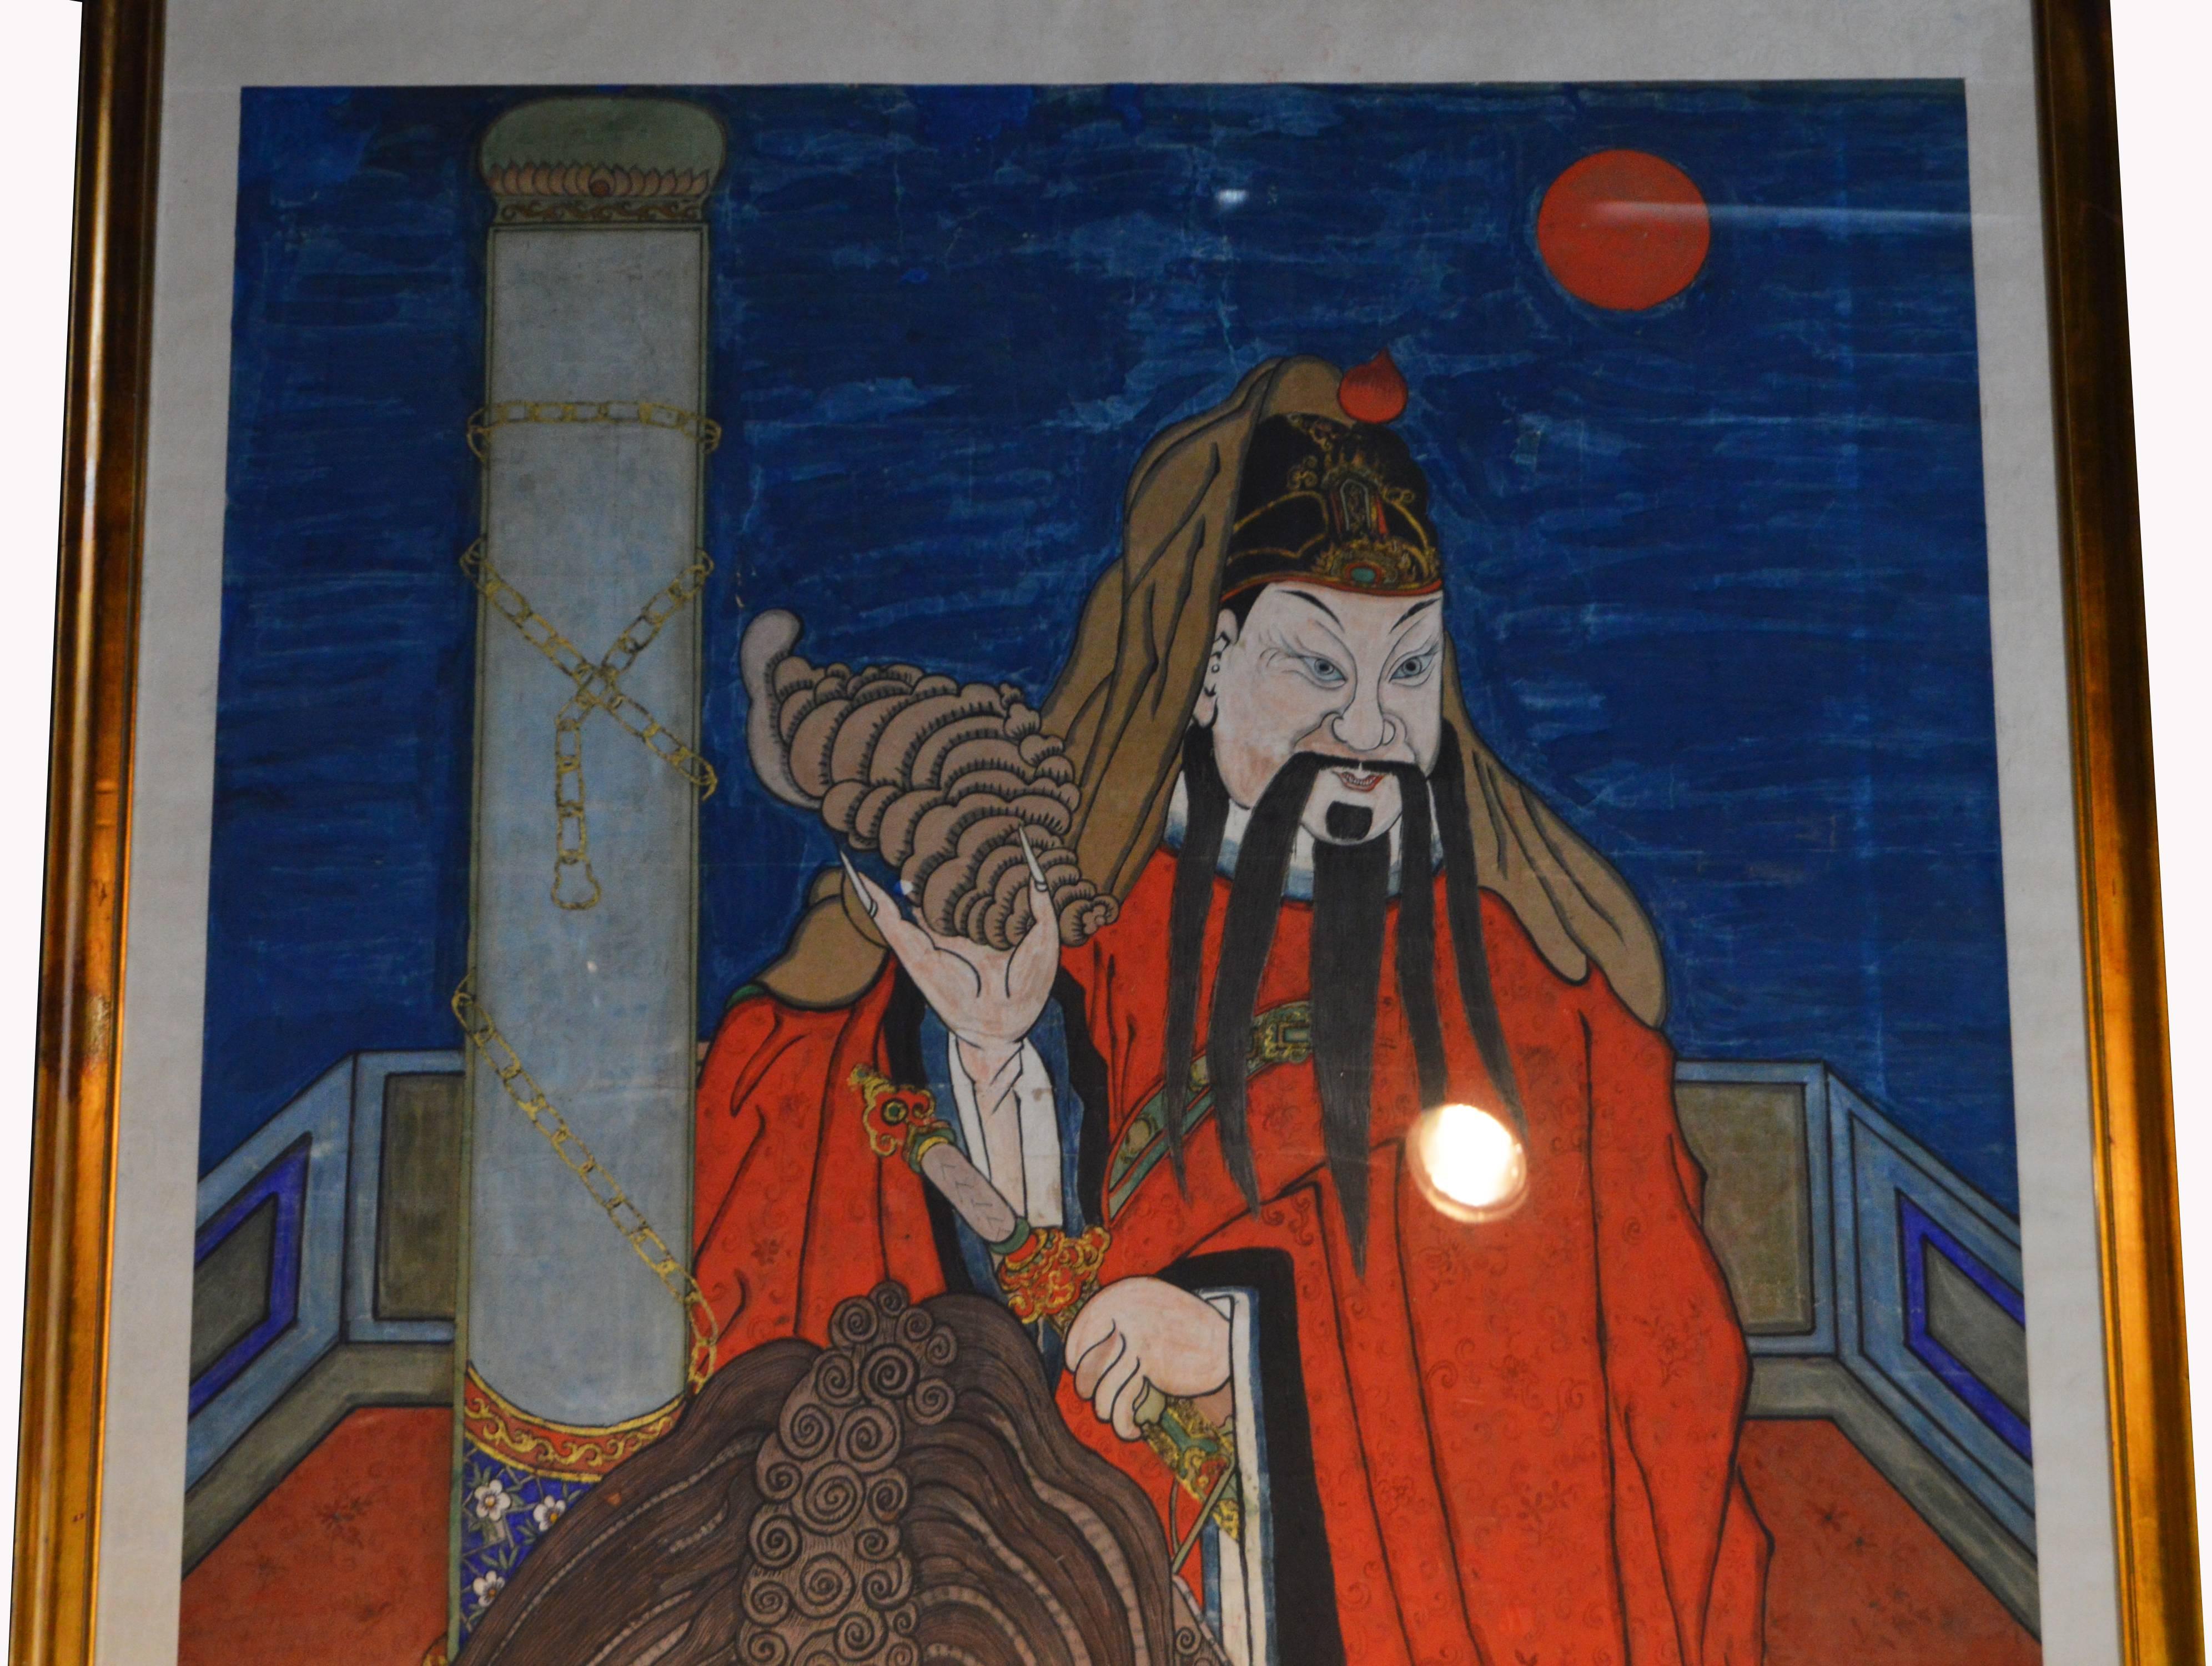 This Chinese 18th century large ancestors portrait was hand painted and framed. This tall painting showcases a colorful ancestor portrait, depicting a bearded man wearing a red coat. An impressive celestial lion accompanies him. Such portraits were